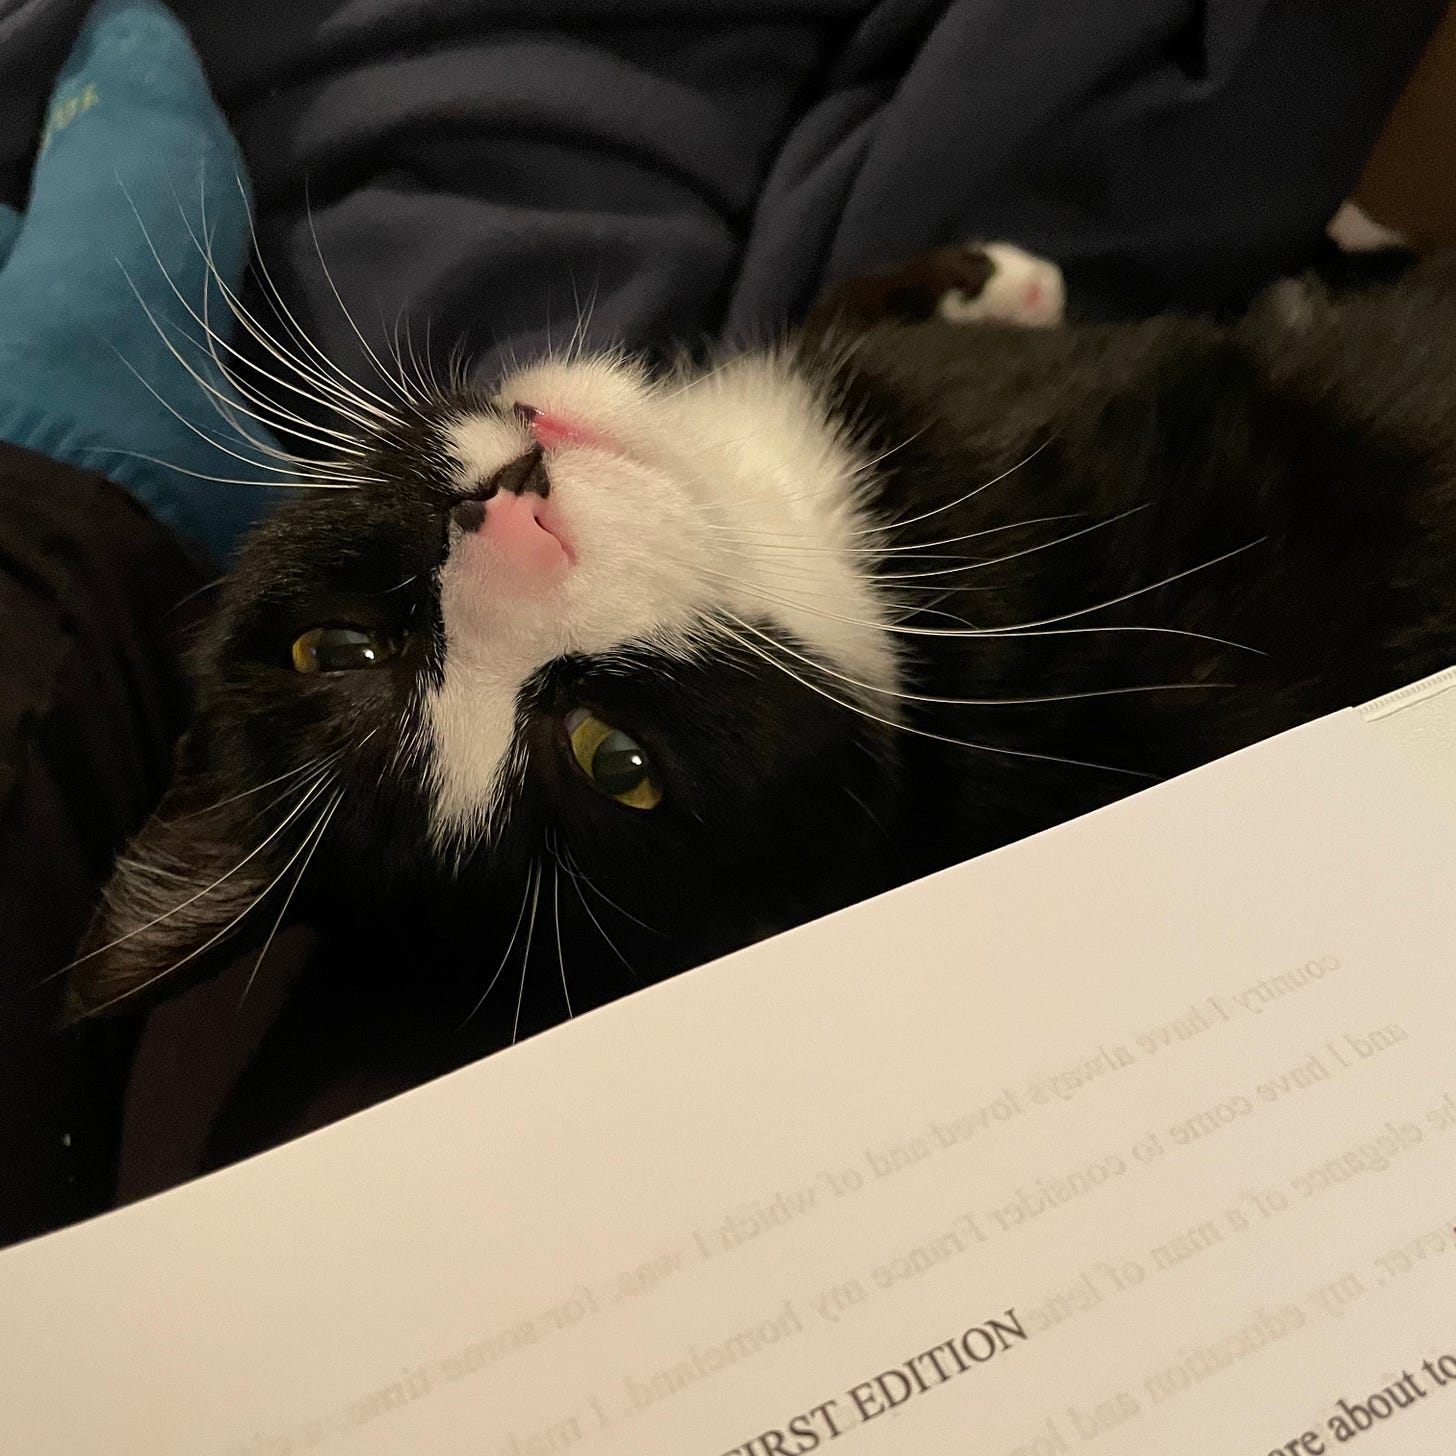 A tuxedo cat sits on the photographer’s lap, on which a manuscript printout is partially visible. The cat looks over his shoulder up at the photographer with adoration.